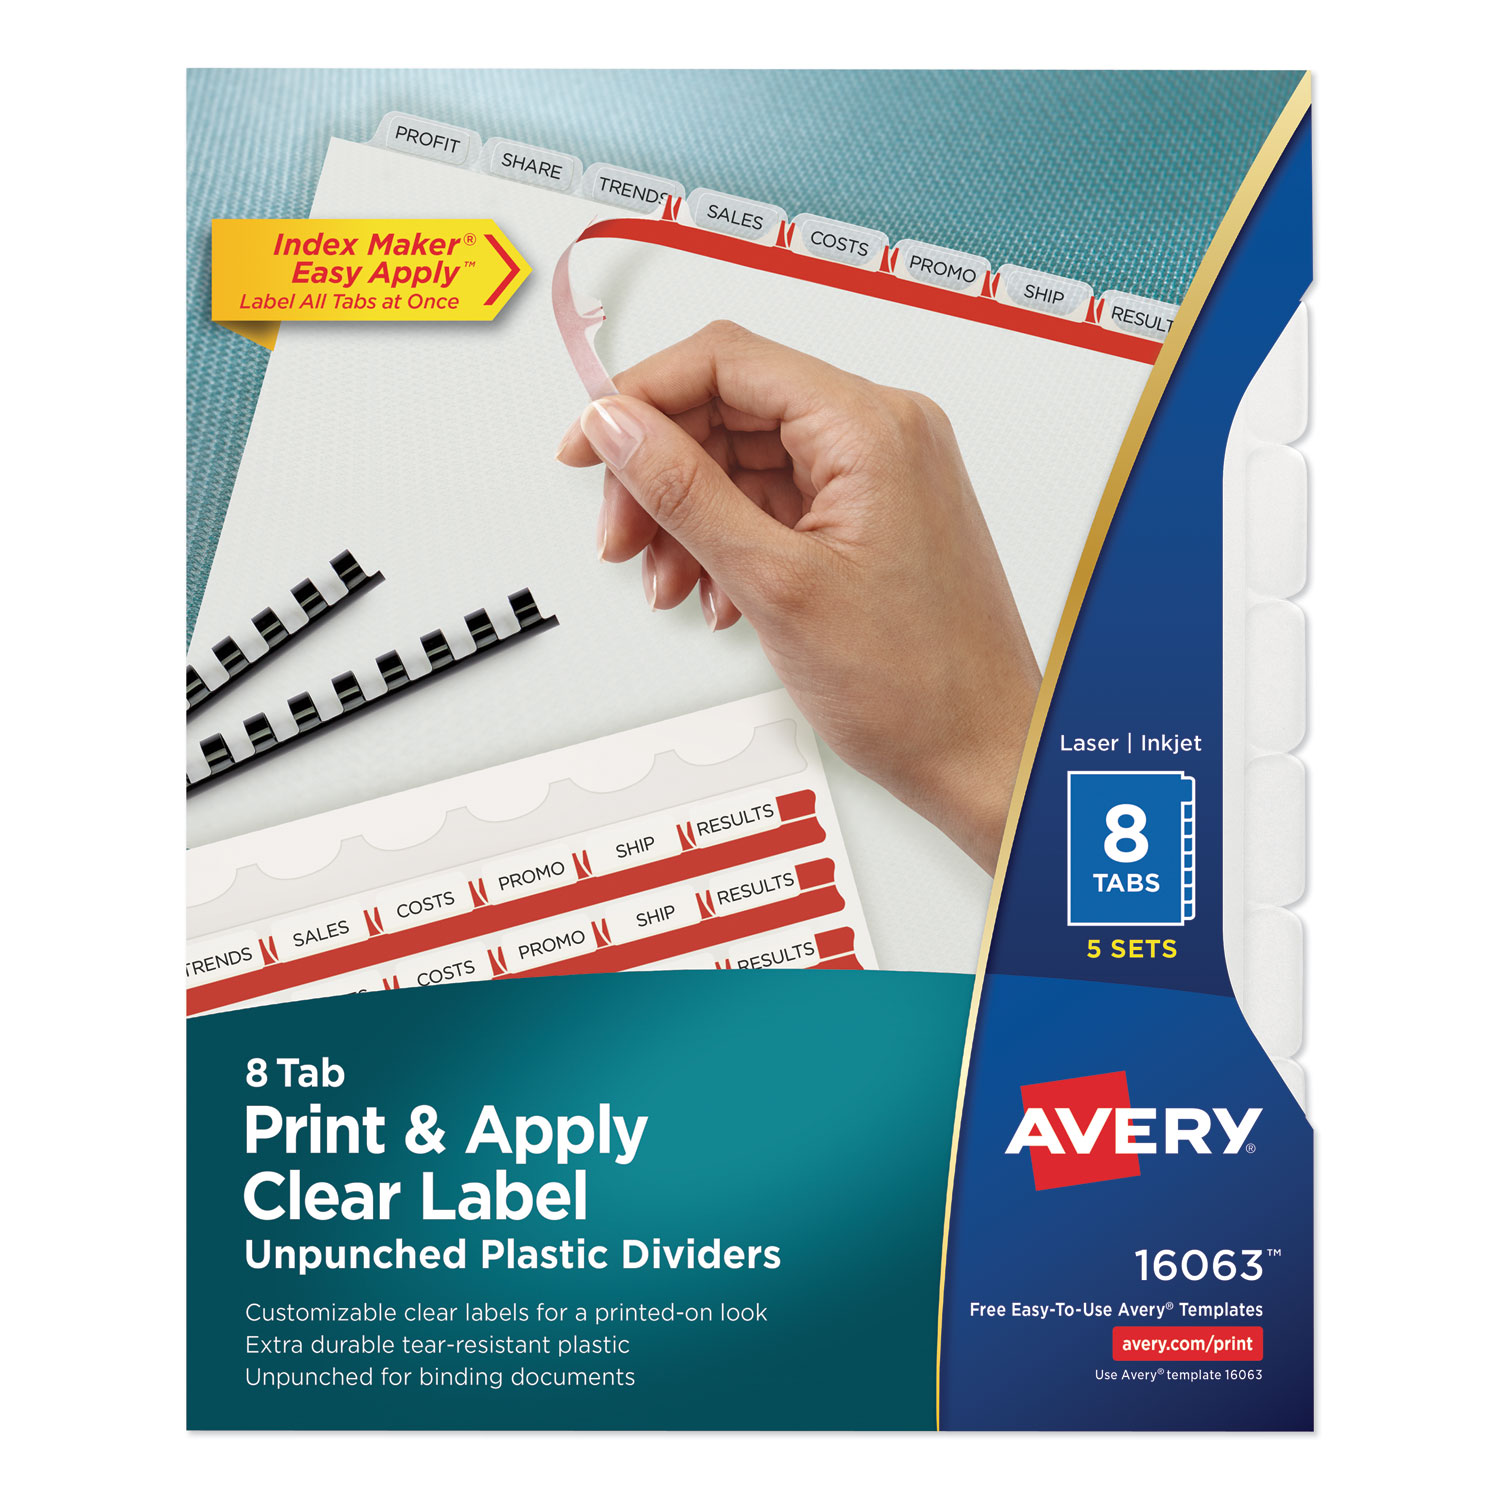  Avery 16063 Print and Apply Index Maker Clear Label Unpunched Dividers with Printable Label Strip, 8-Tab, 11 x 8.5, Clear, 5 Sets (AVE16063) 